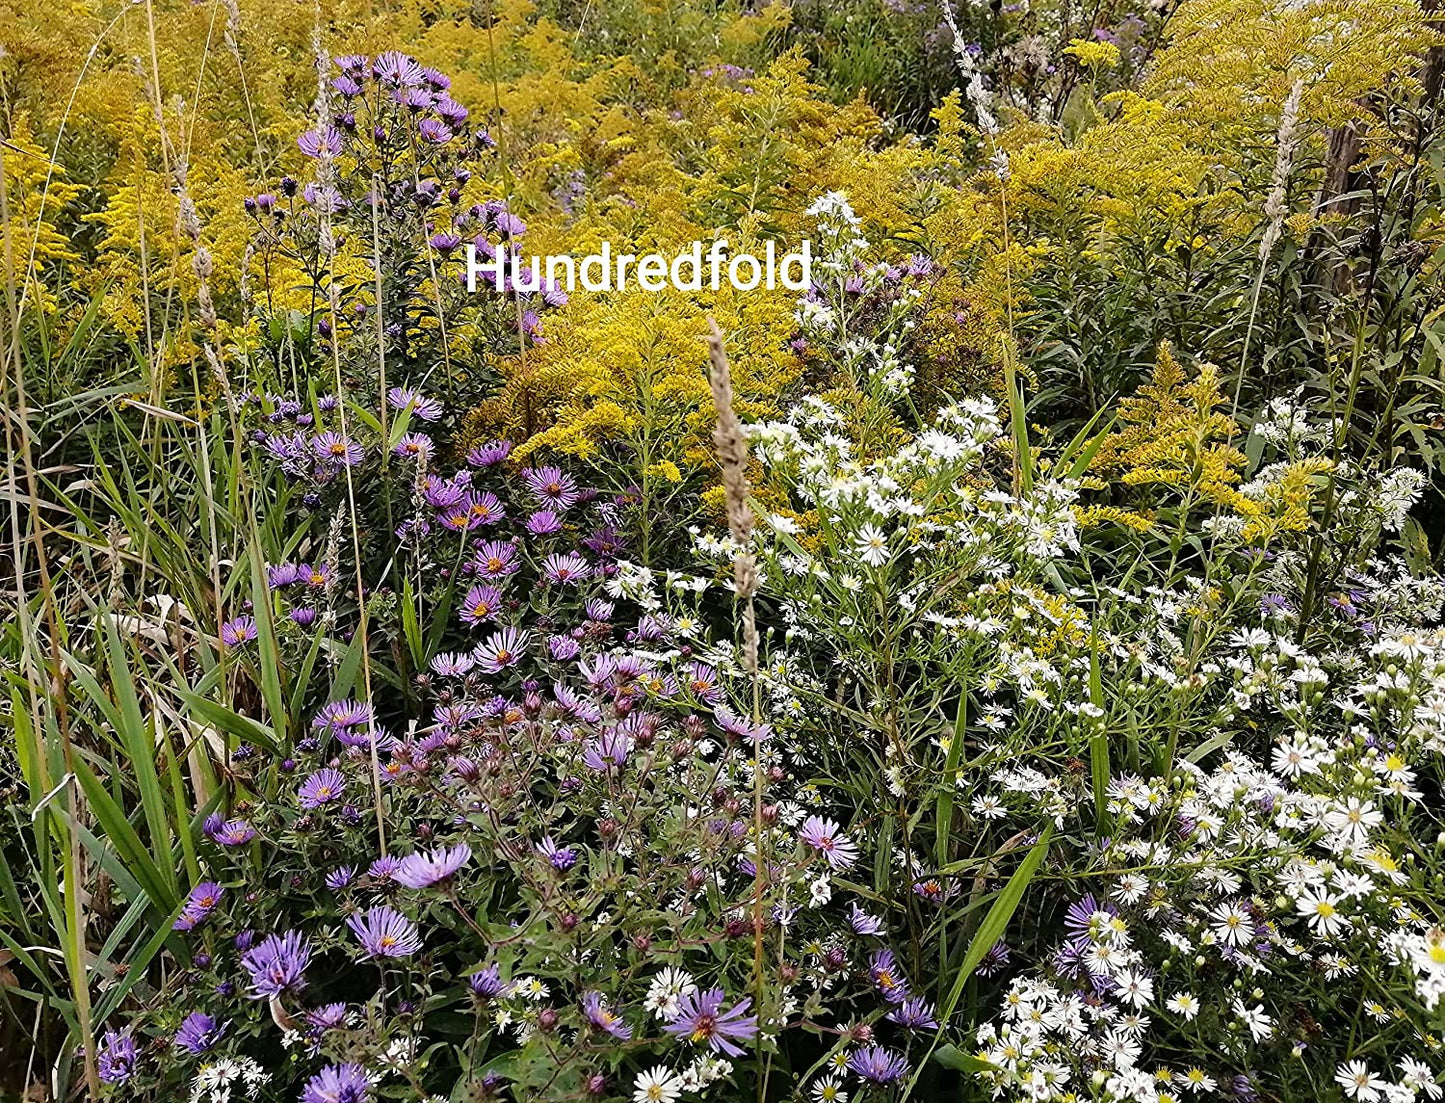 Hundredfold 100 New England Aster Seeds - Symphyotrichum novae-angliae Canada Native Wildflower Nectar Source for Monarch Butterflies and Bees, Autumn Garden Staple